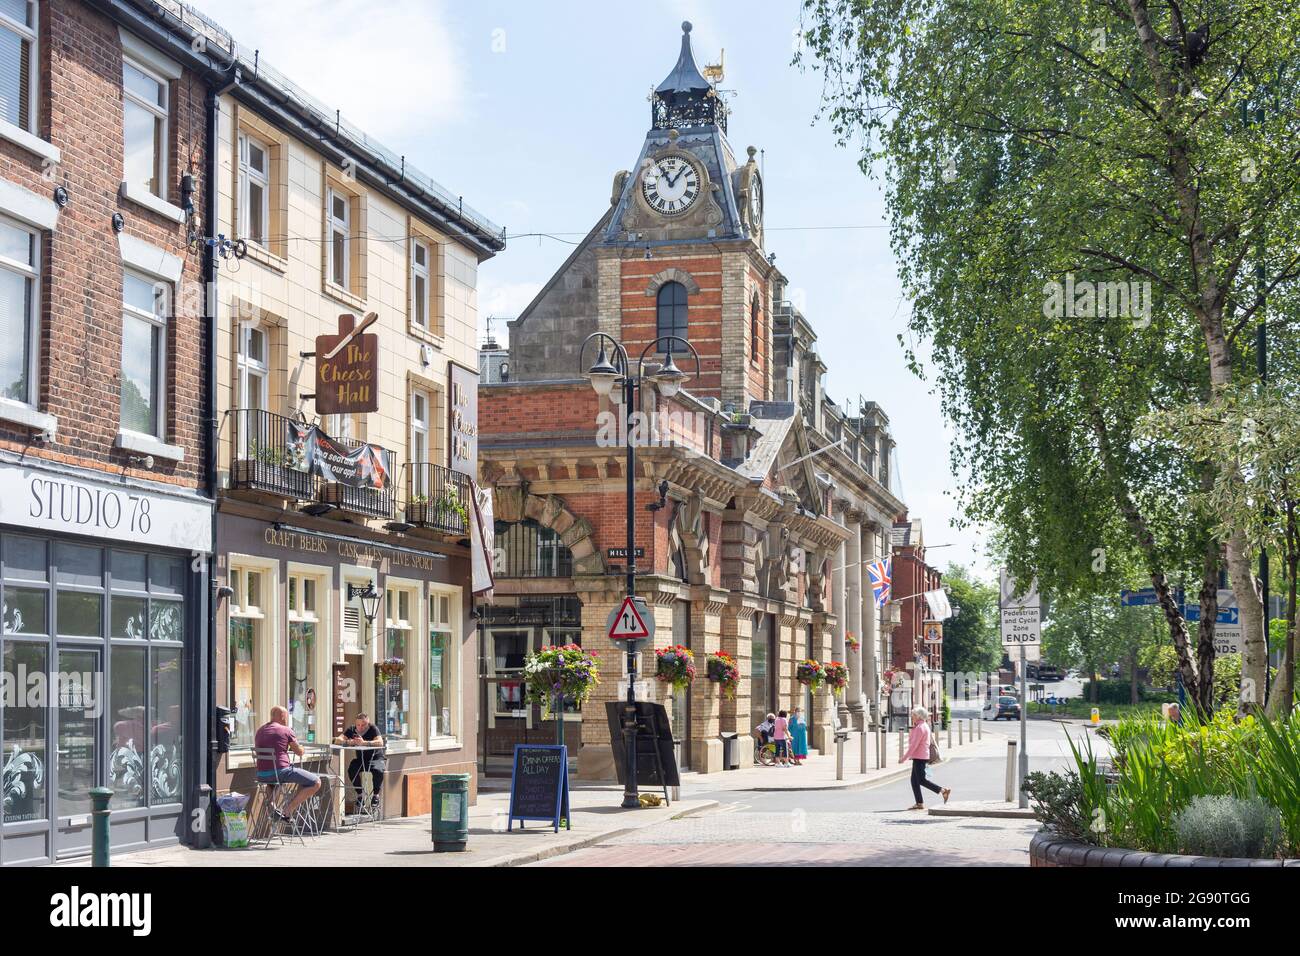 Old Market Hall from Earle Street, Crewe, Cheshire, England, United Kingdom Stock Photo